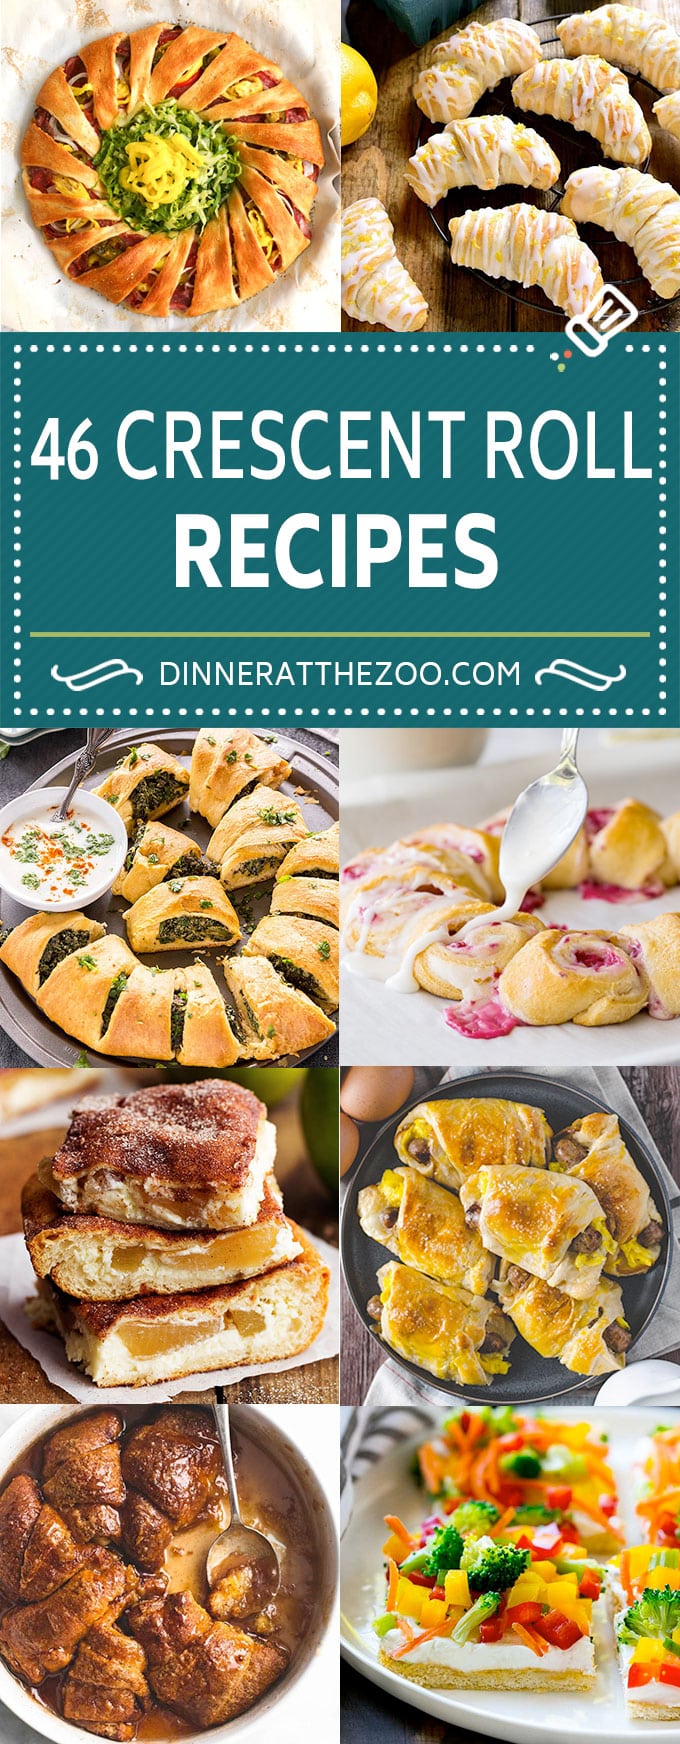 Crescent Roll Recipes | Crescent Roll Appetizers | Crescent Roll Desserts | Crescent Roll Meals #crescentrolls #appetizer #dinneratthezoo